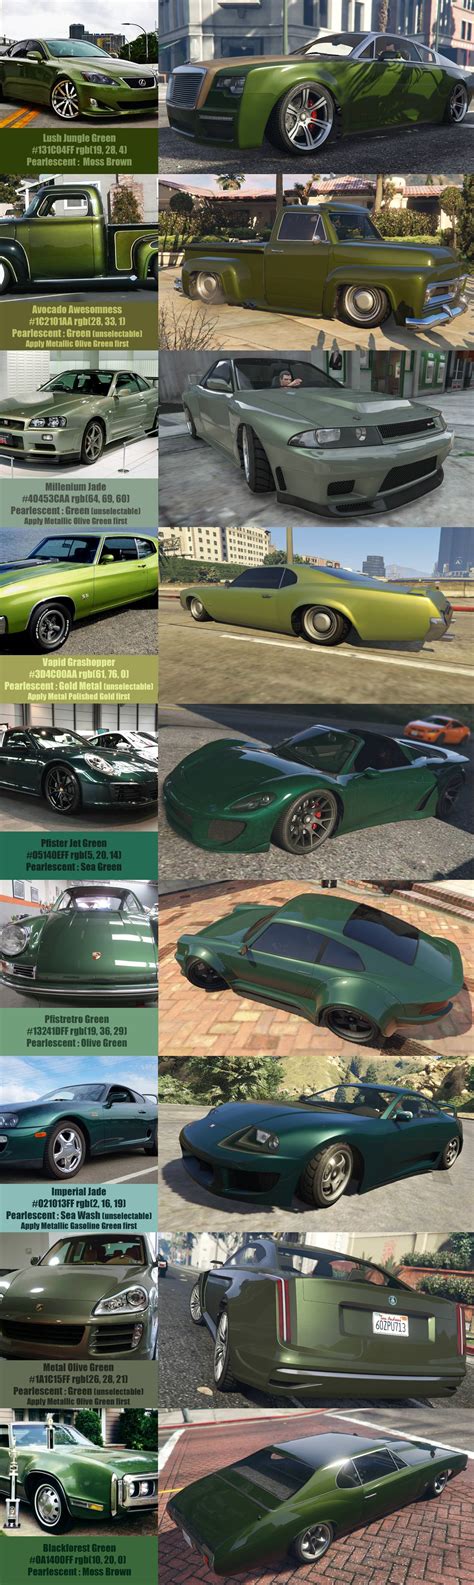 GFX Requests & Tutorials. Writers' Discussion. Debates & Discussion. Express your artistic talents, request a piece of graphic art, share your literary work and discuss issues too complex for other forums here. 269.7k. [Request] Vapid Scrap Truck and Brute Tipper liveries. By Graven, 12 hours ago. 